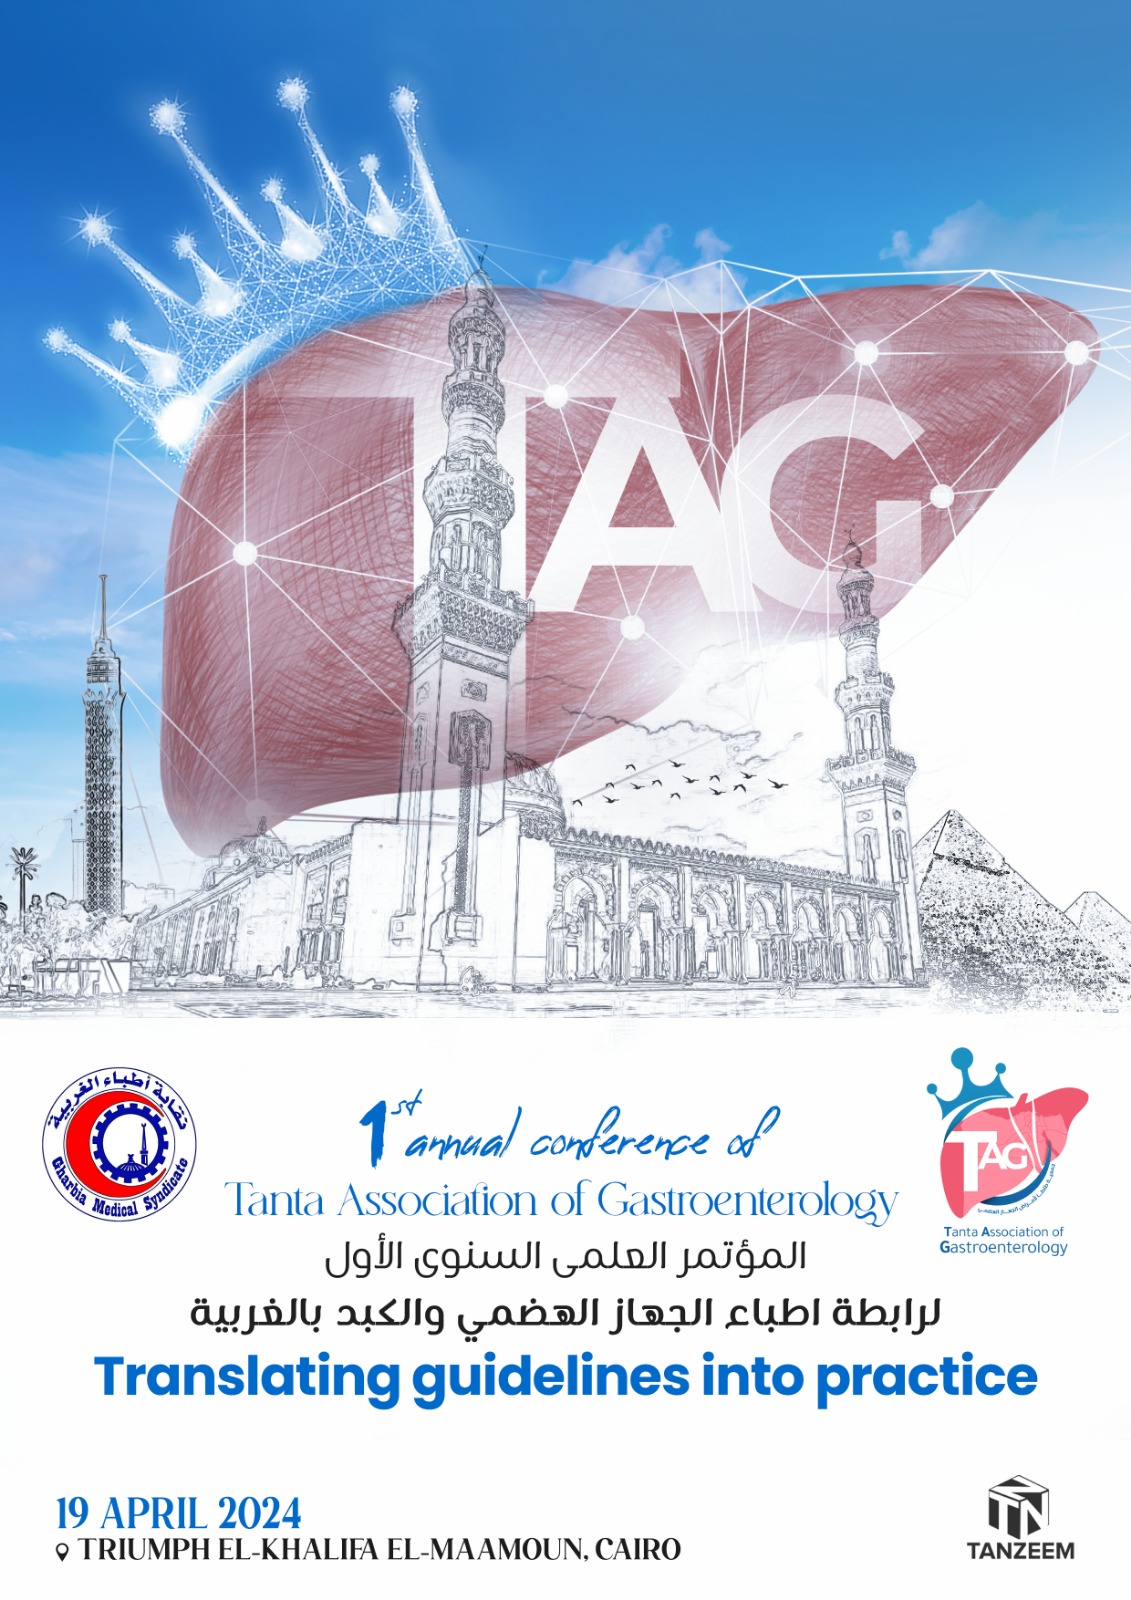 1st Annual Conference of Tanta Association of Gastroenterology